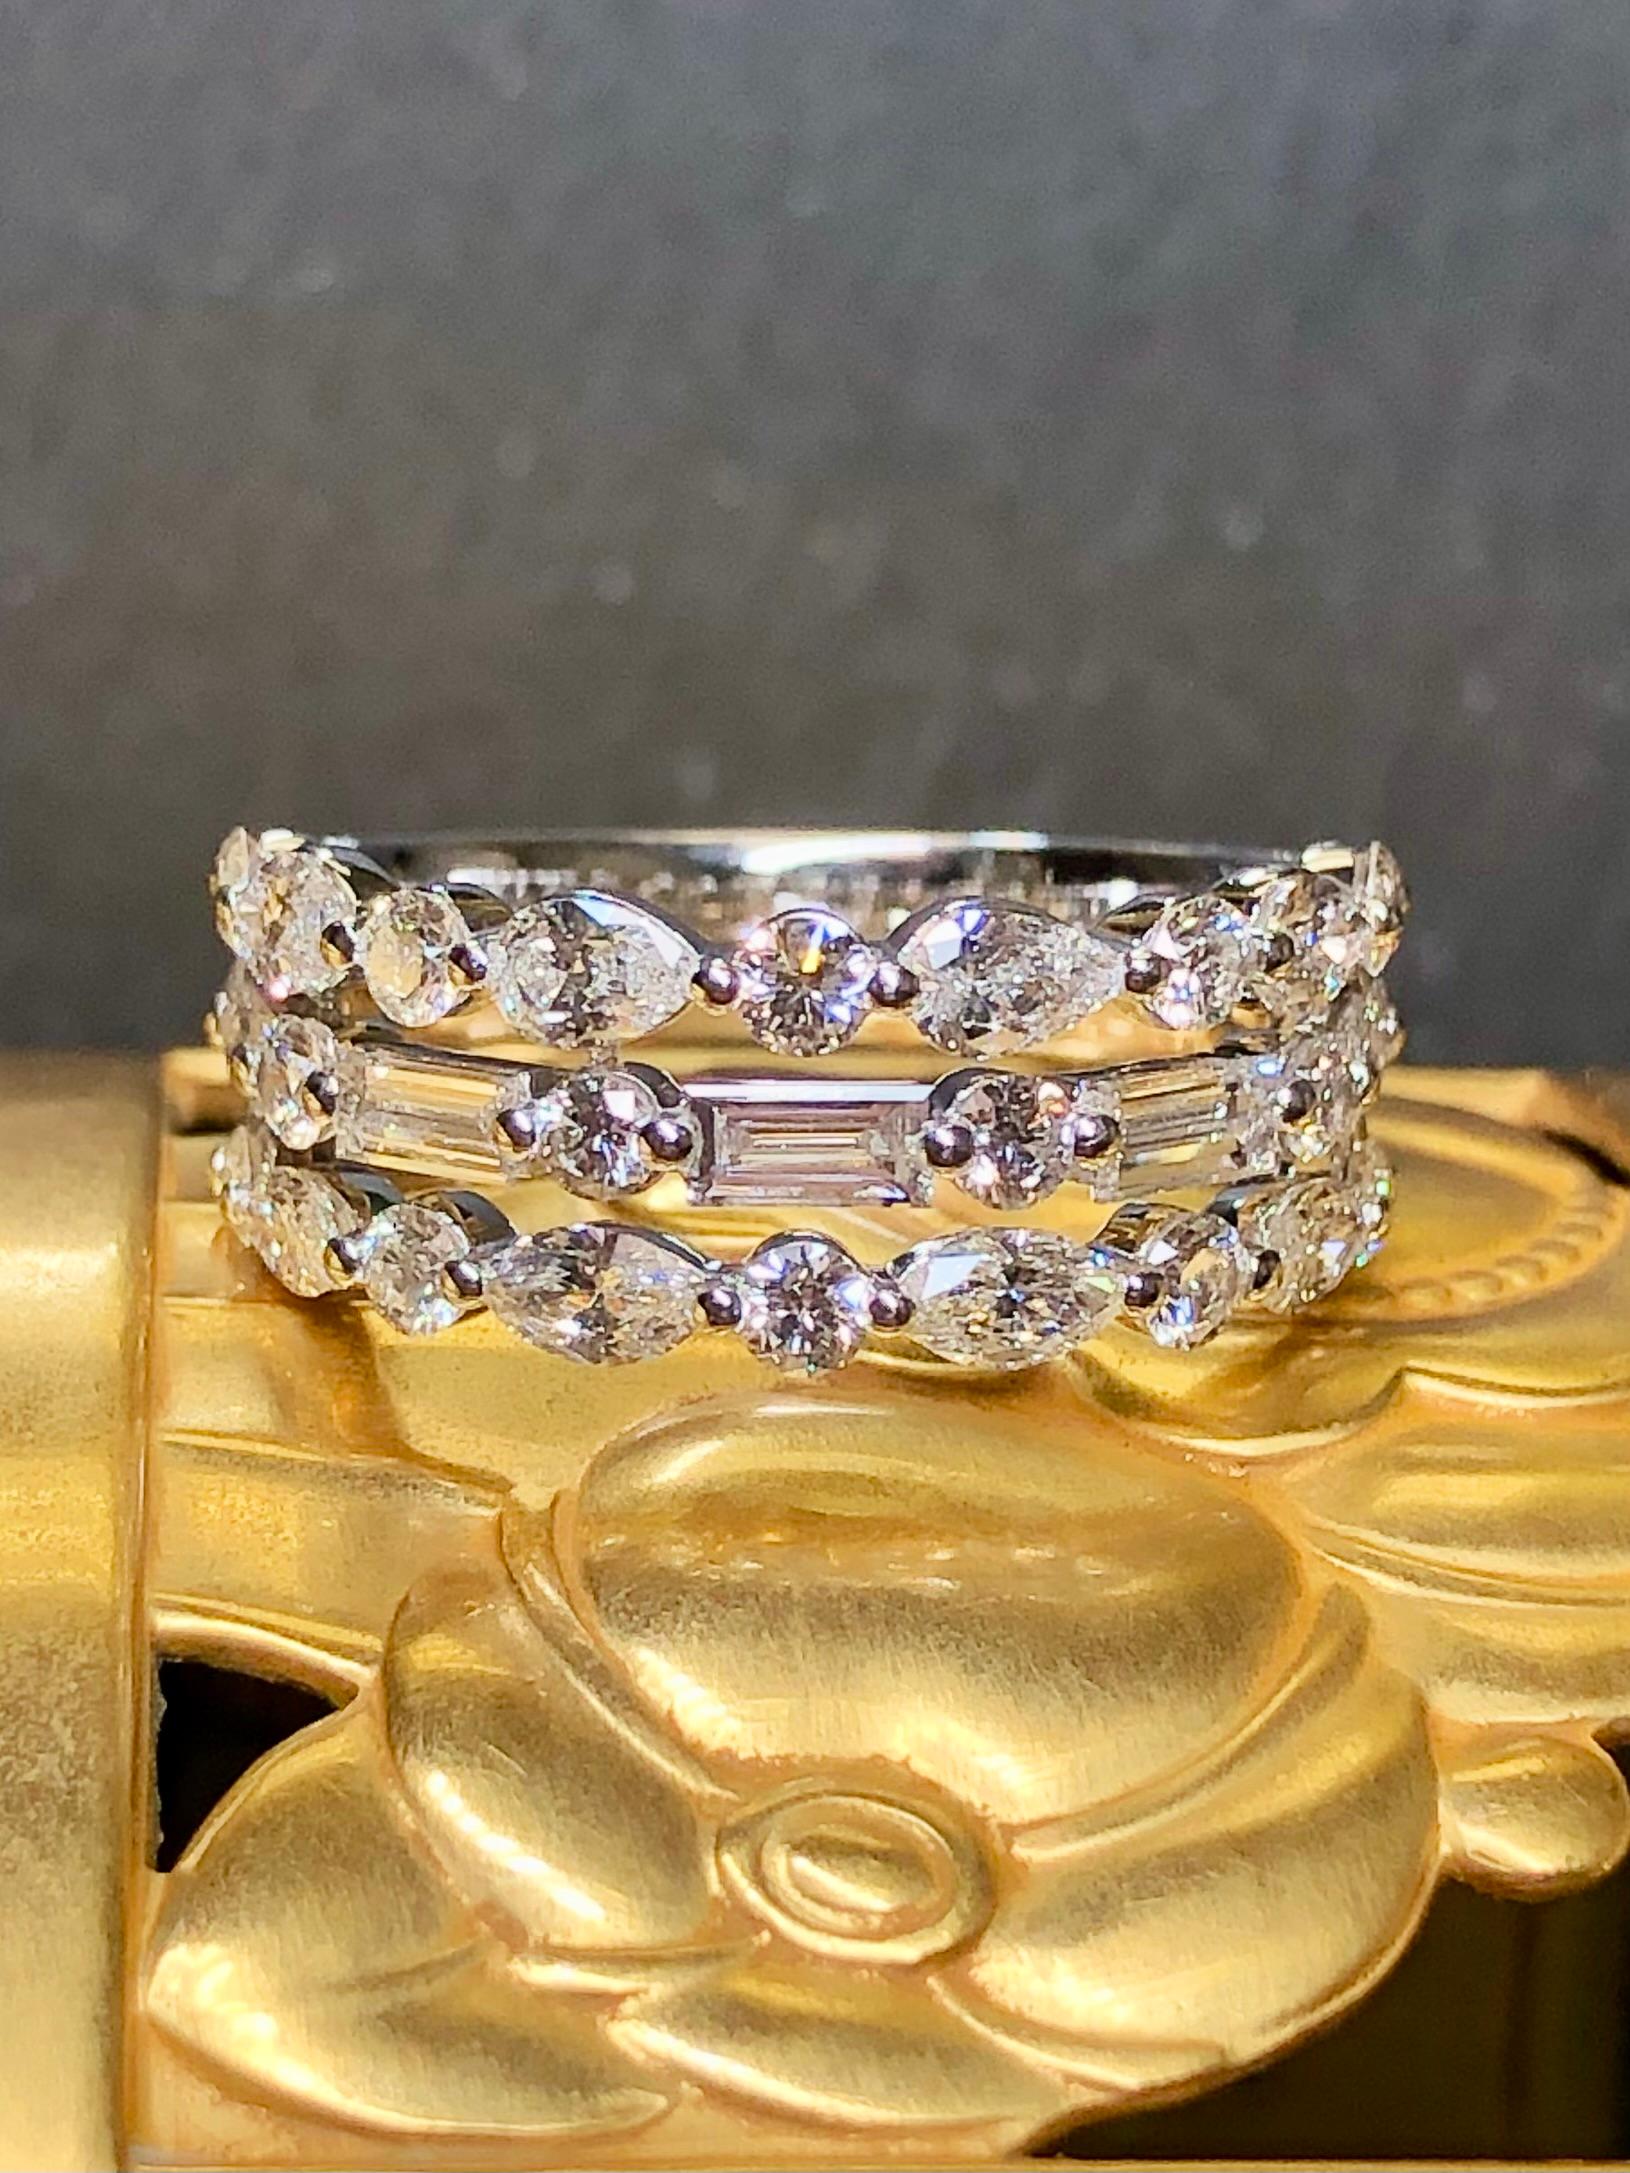 The premiere diamond anniversary band by NEIL LANE done in 14K white gold and set with approximately 2cttw in G-I color Vs1-2 clarity round, baguette, marquise and pear shape diamonds.


Dimensions/Weight:

Ring measures 8mm and is a size 7